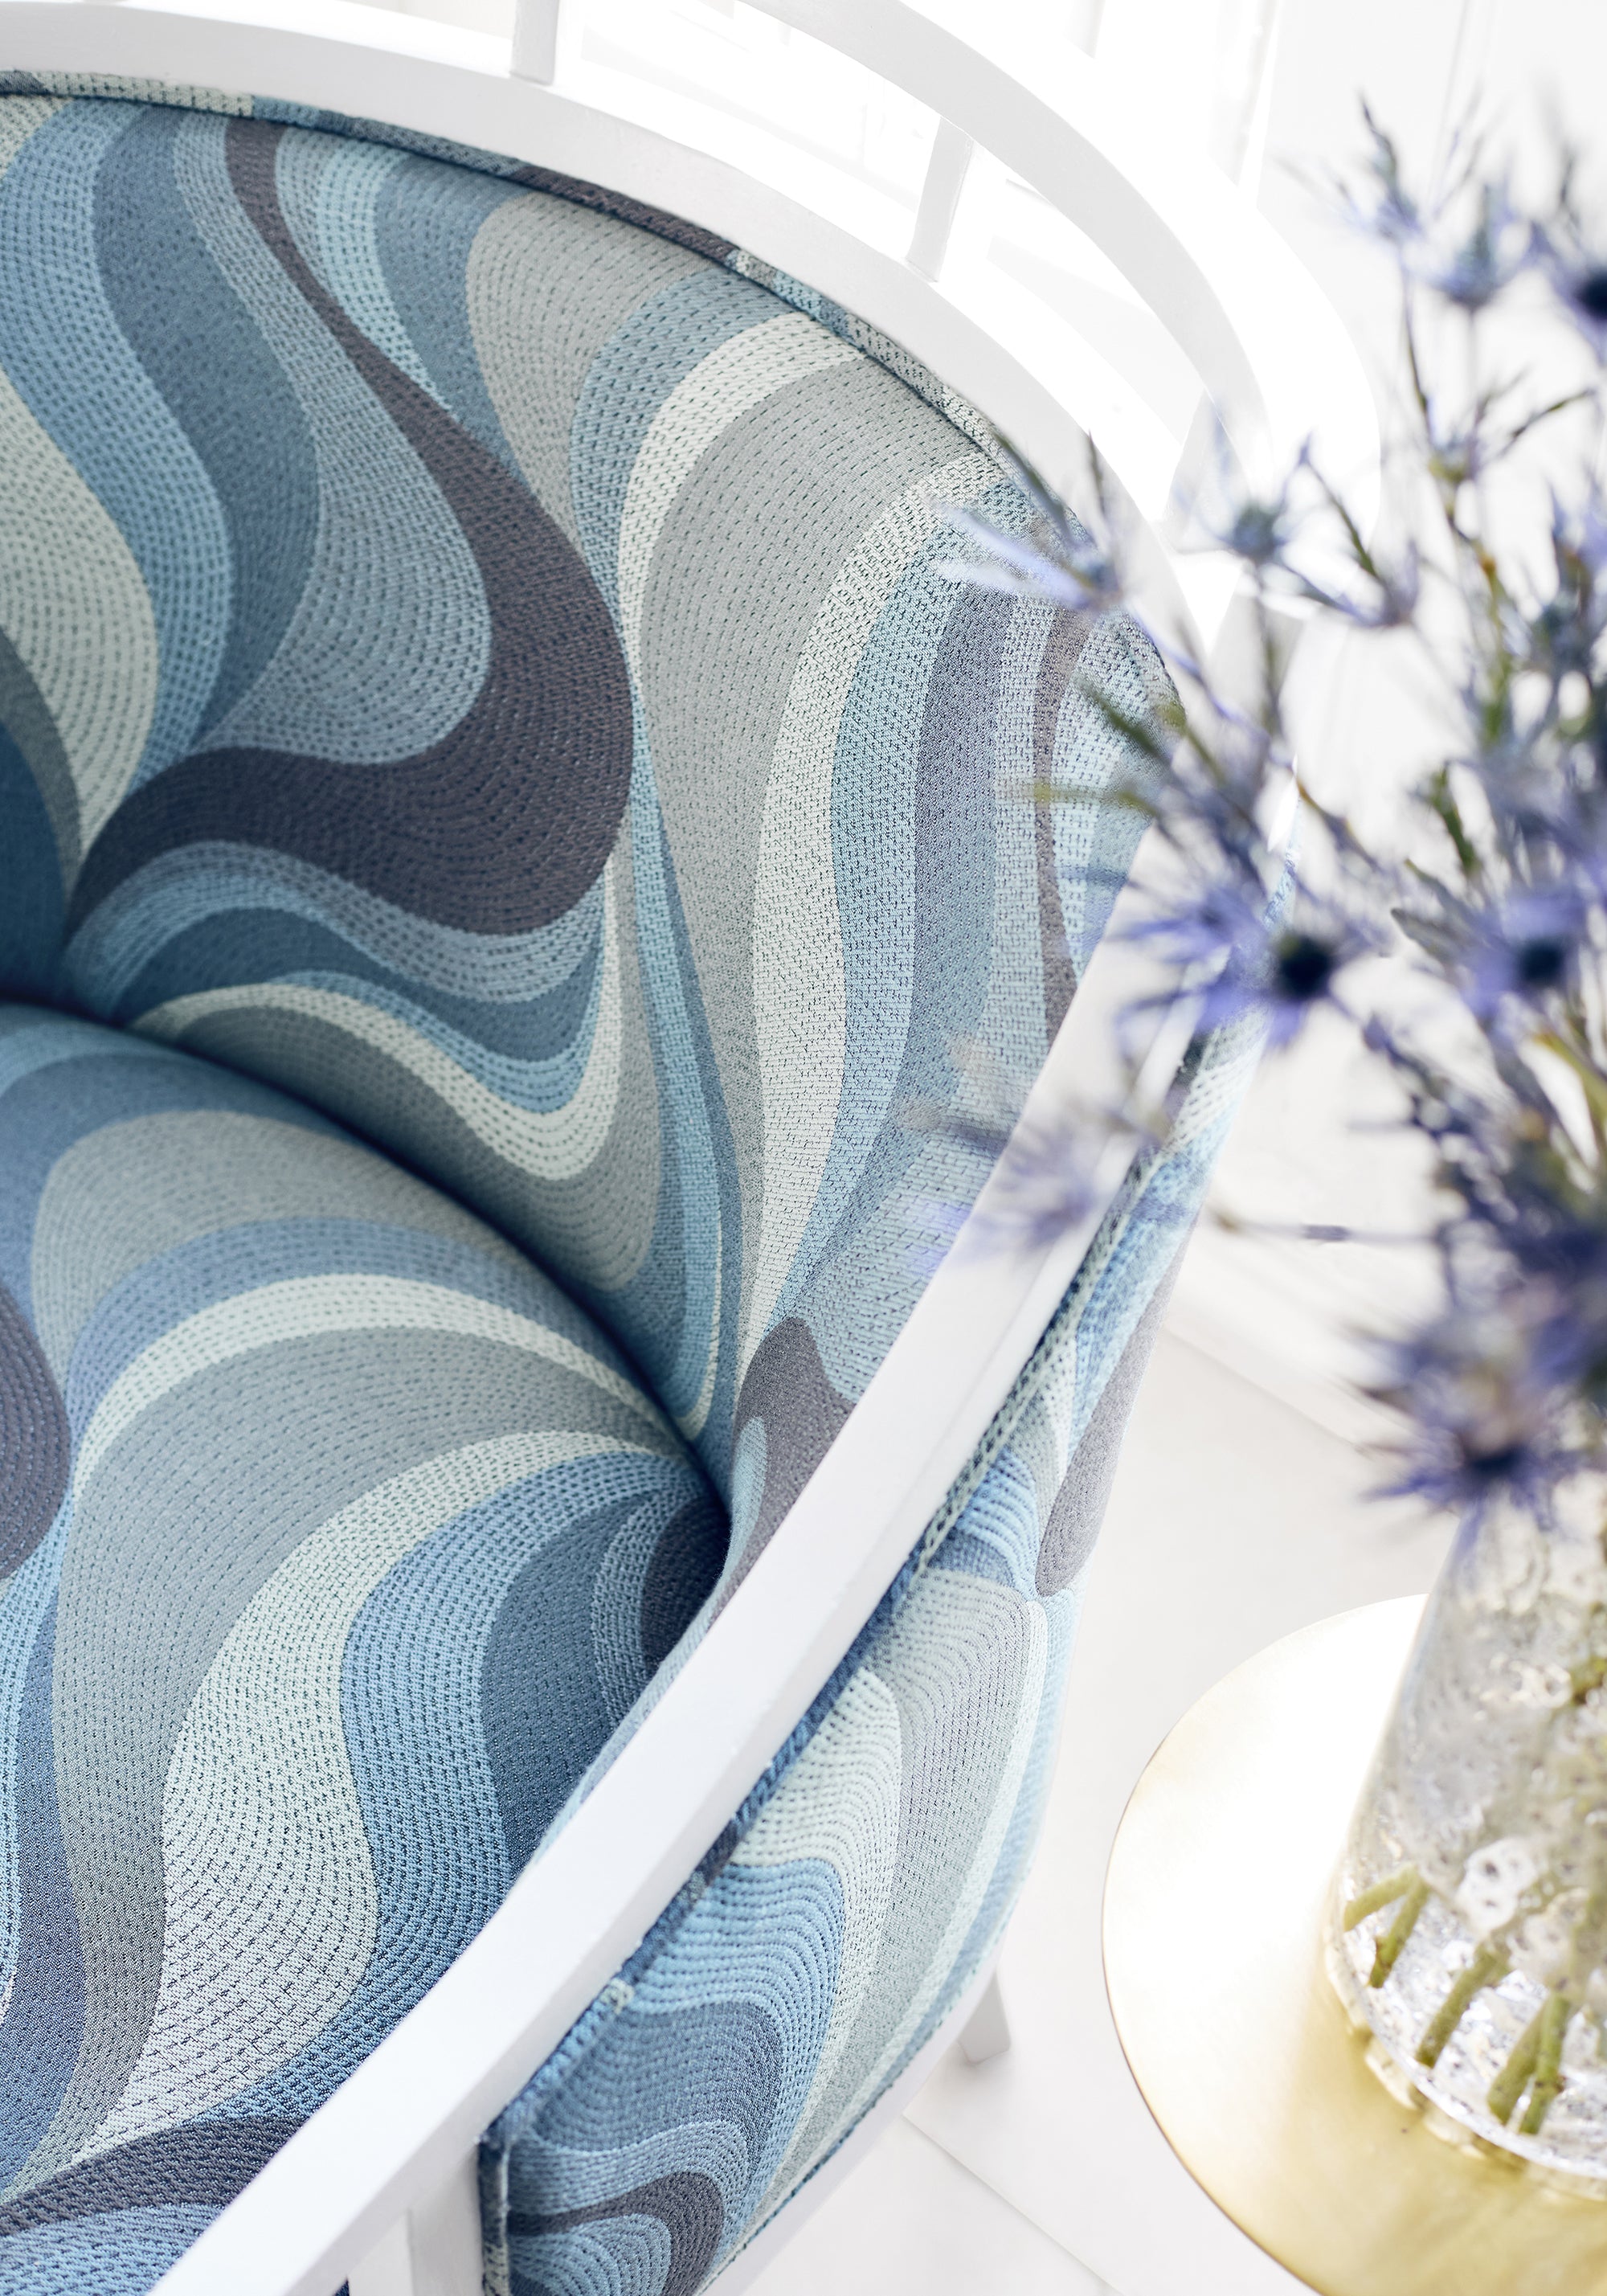 Closeup of Malibu Chair in Passage woven fabric in Lake color - pattern number W74201 - by Thibaut in the Passage collection